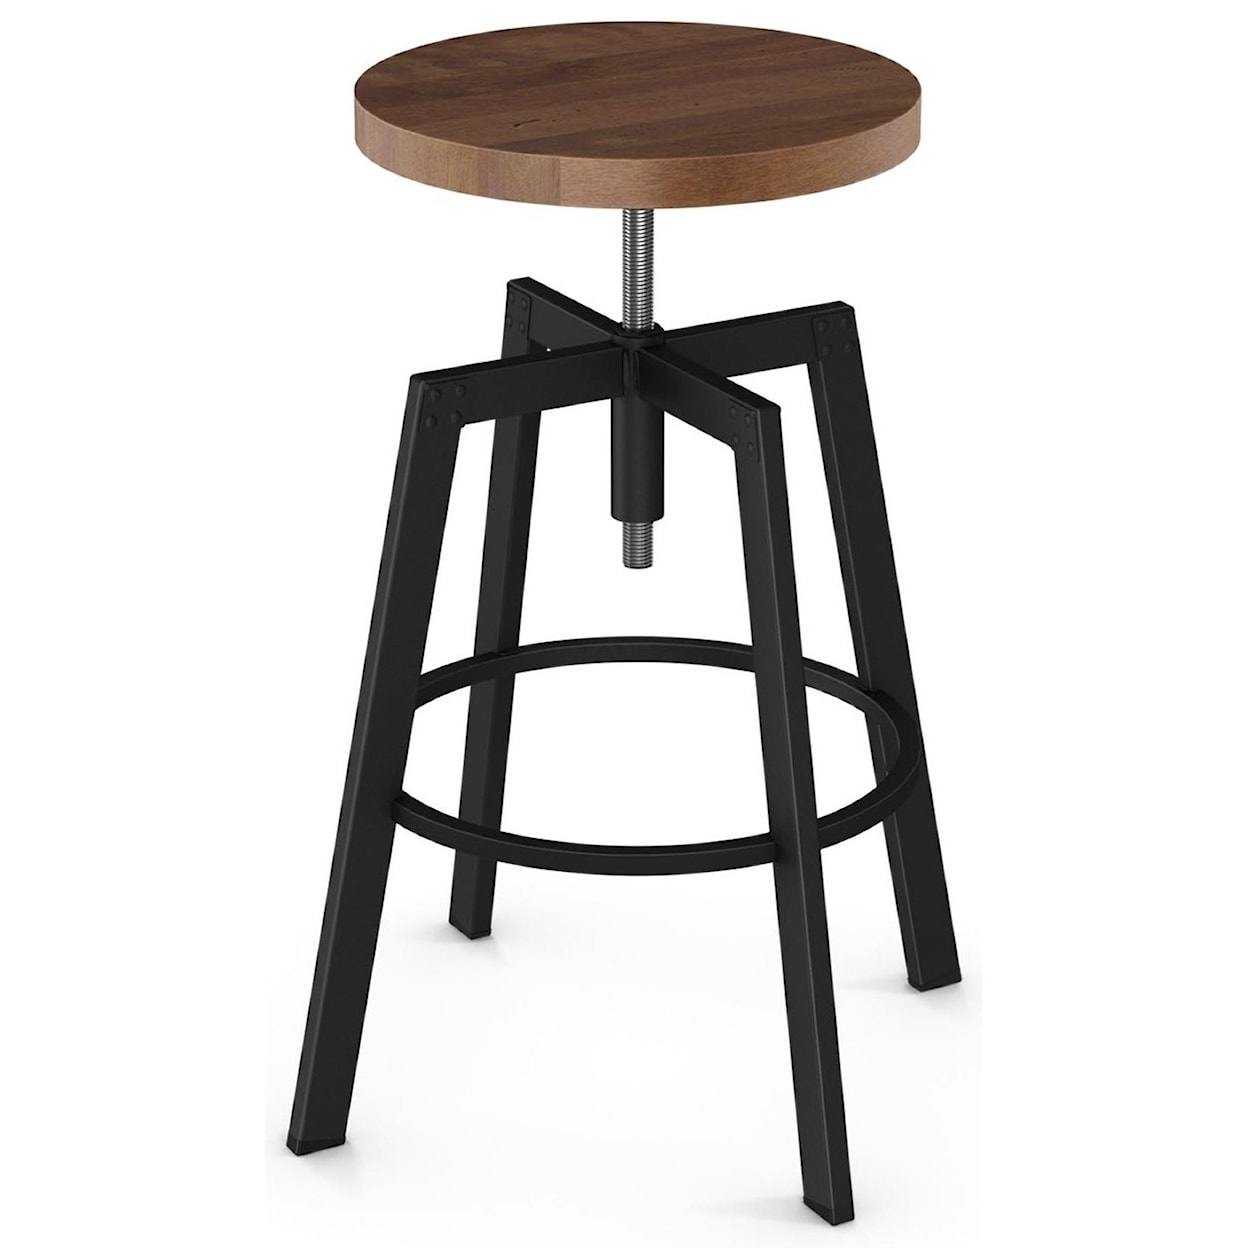 Amisco Industrial Architect Screw Stool with Wood Seat